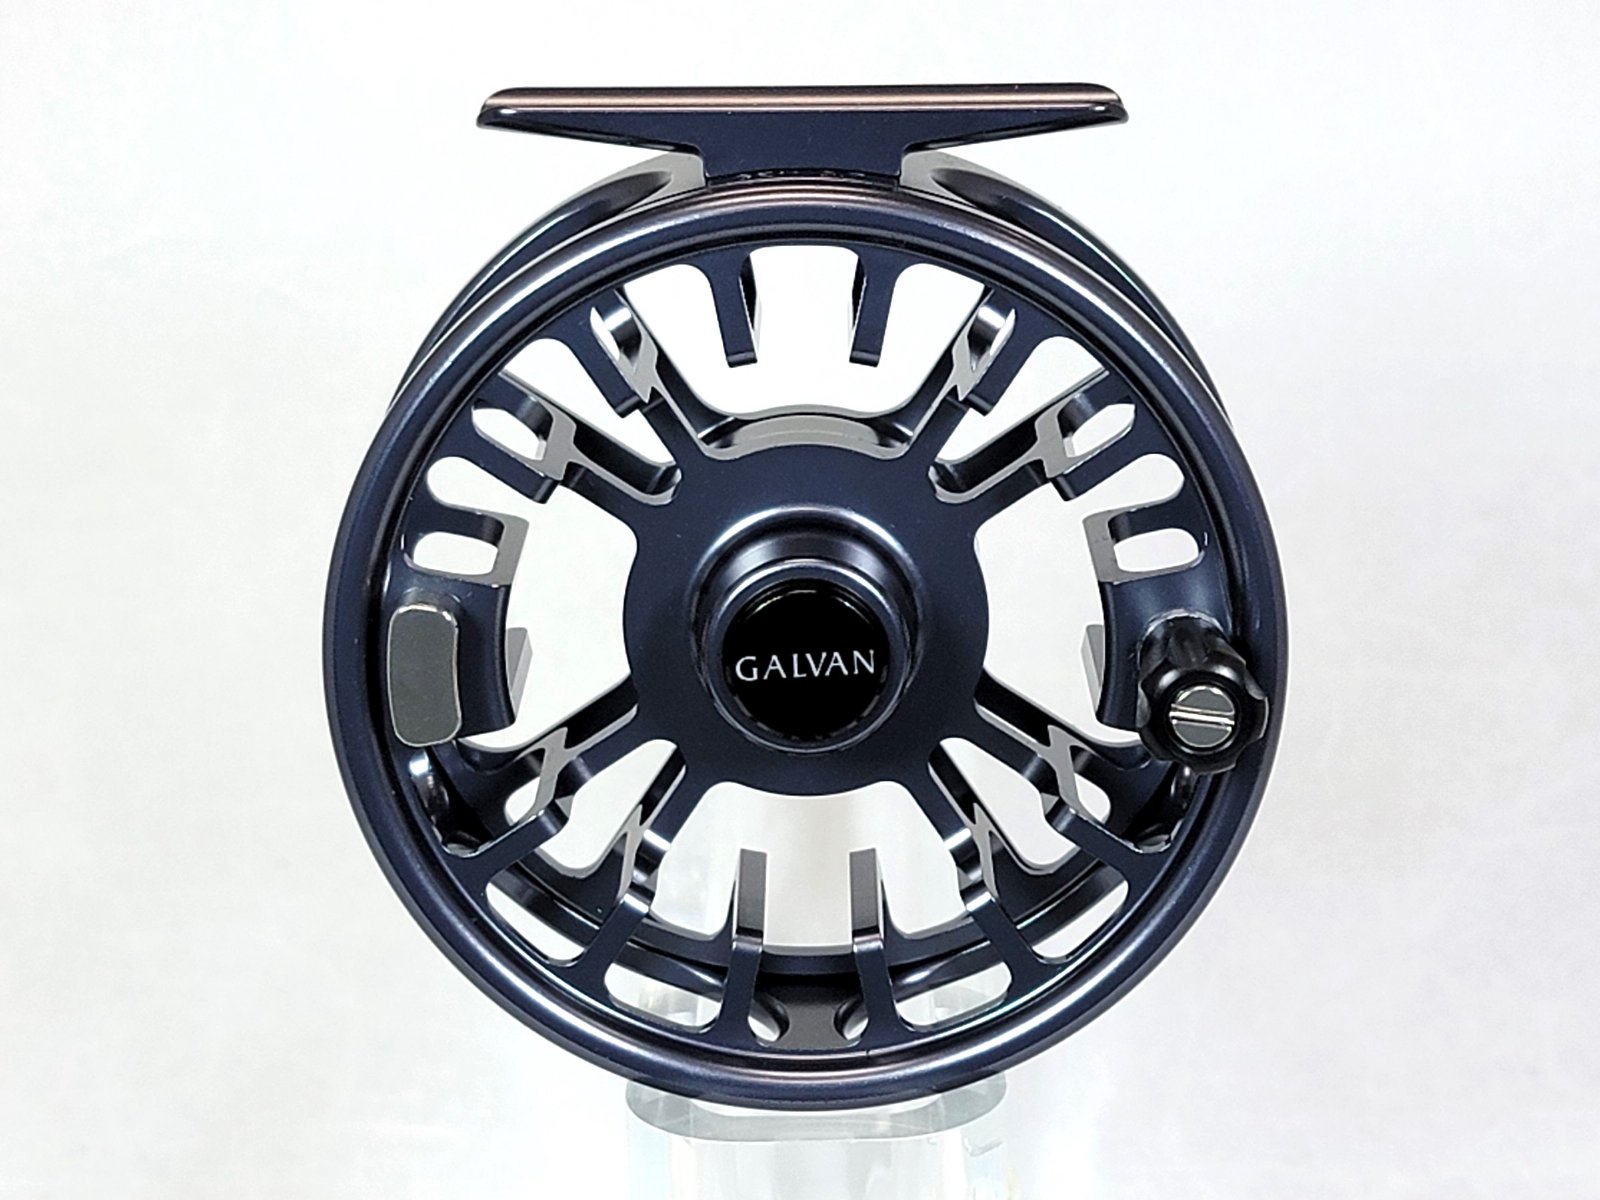 Galvan G.E.N. Euro Nymph Fly Reels - Free Fly Line